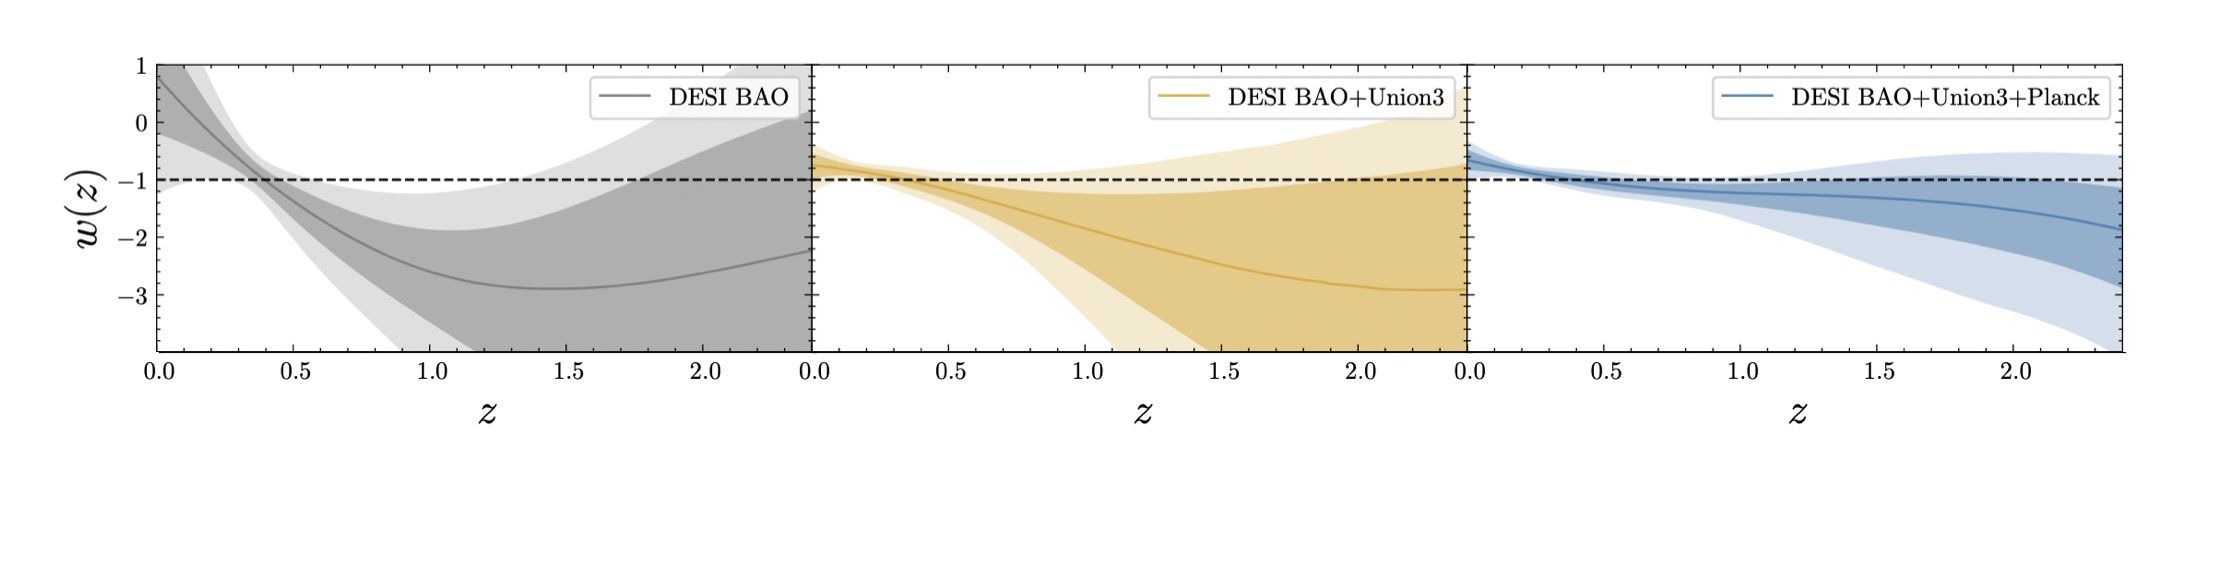 Three plots show the dark energy equation of state parameter (w(z)) versus redshift (z) with different data: DES BAO (gray), DES BAO+H(z) (yellow), and DES BAO+H(z)+Planck (blue), offering insights into how the universe reaches equilibrium over time.